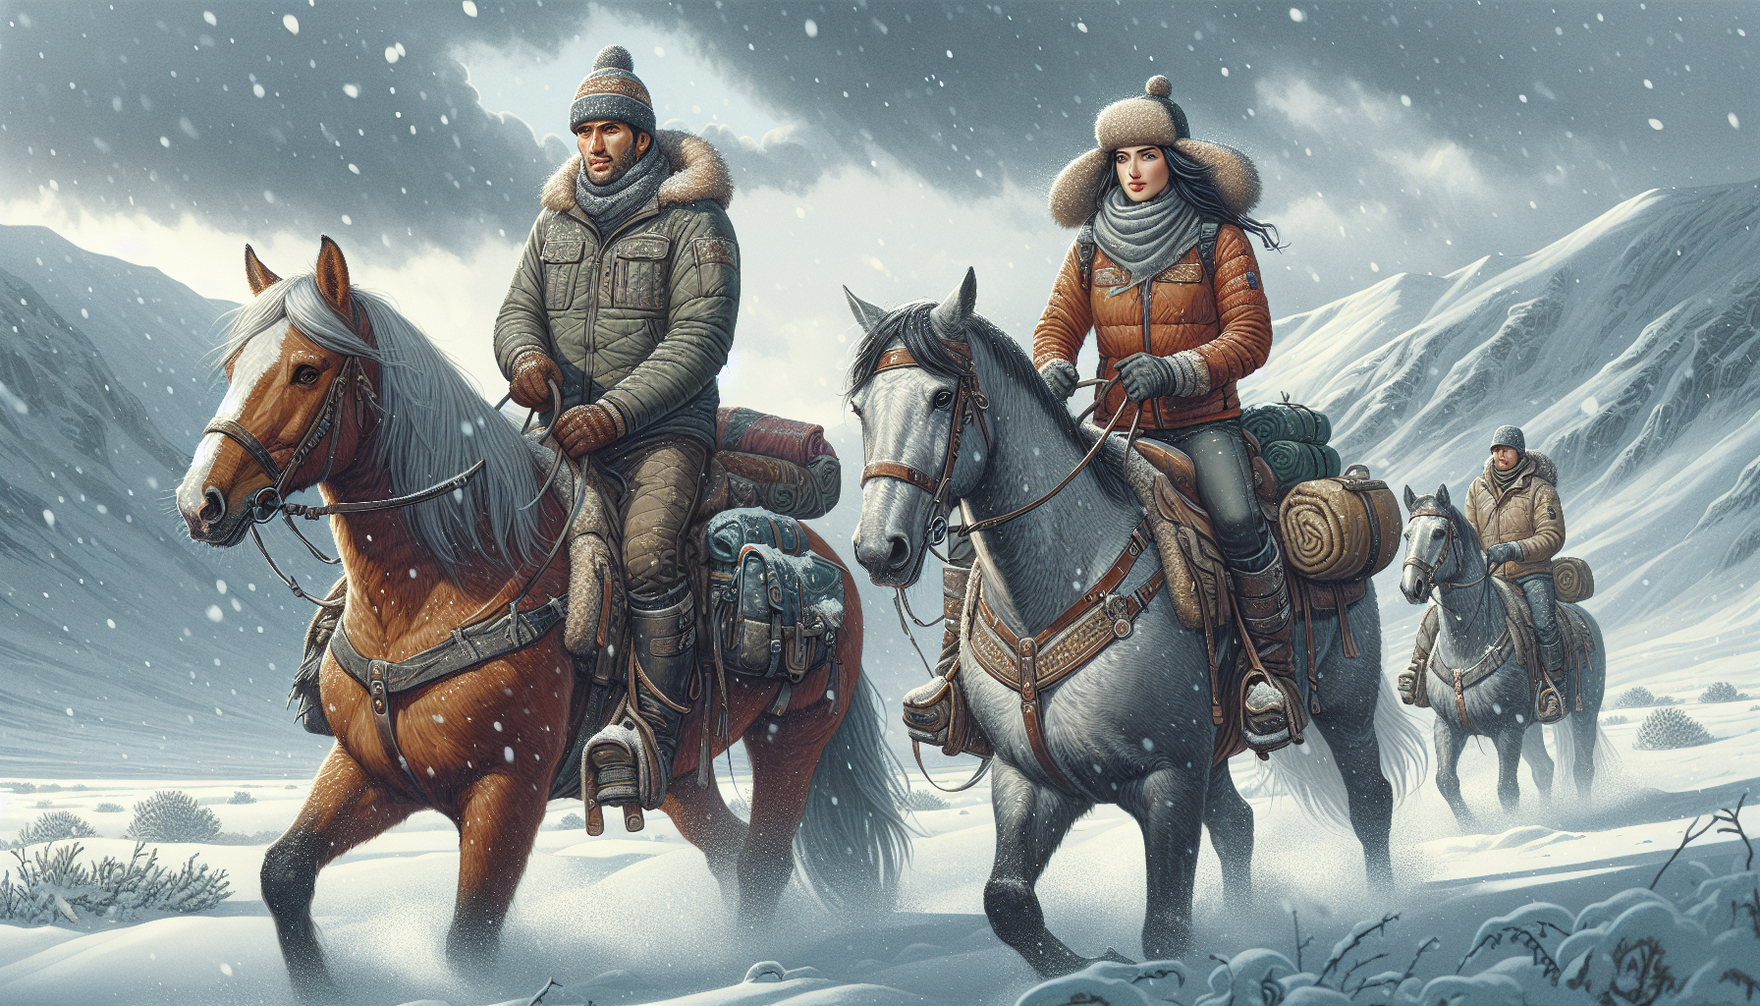 An image featuring a winter-themed landscape with snowflakes lightly falling from a grey, cloud-filled sky. A male rider of South-Asian descent, and a female rider of Caucasian descent are riding hors